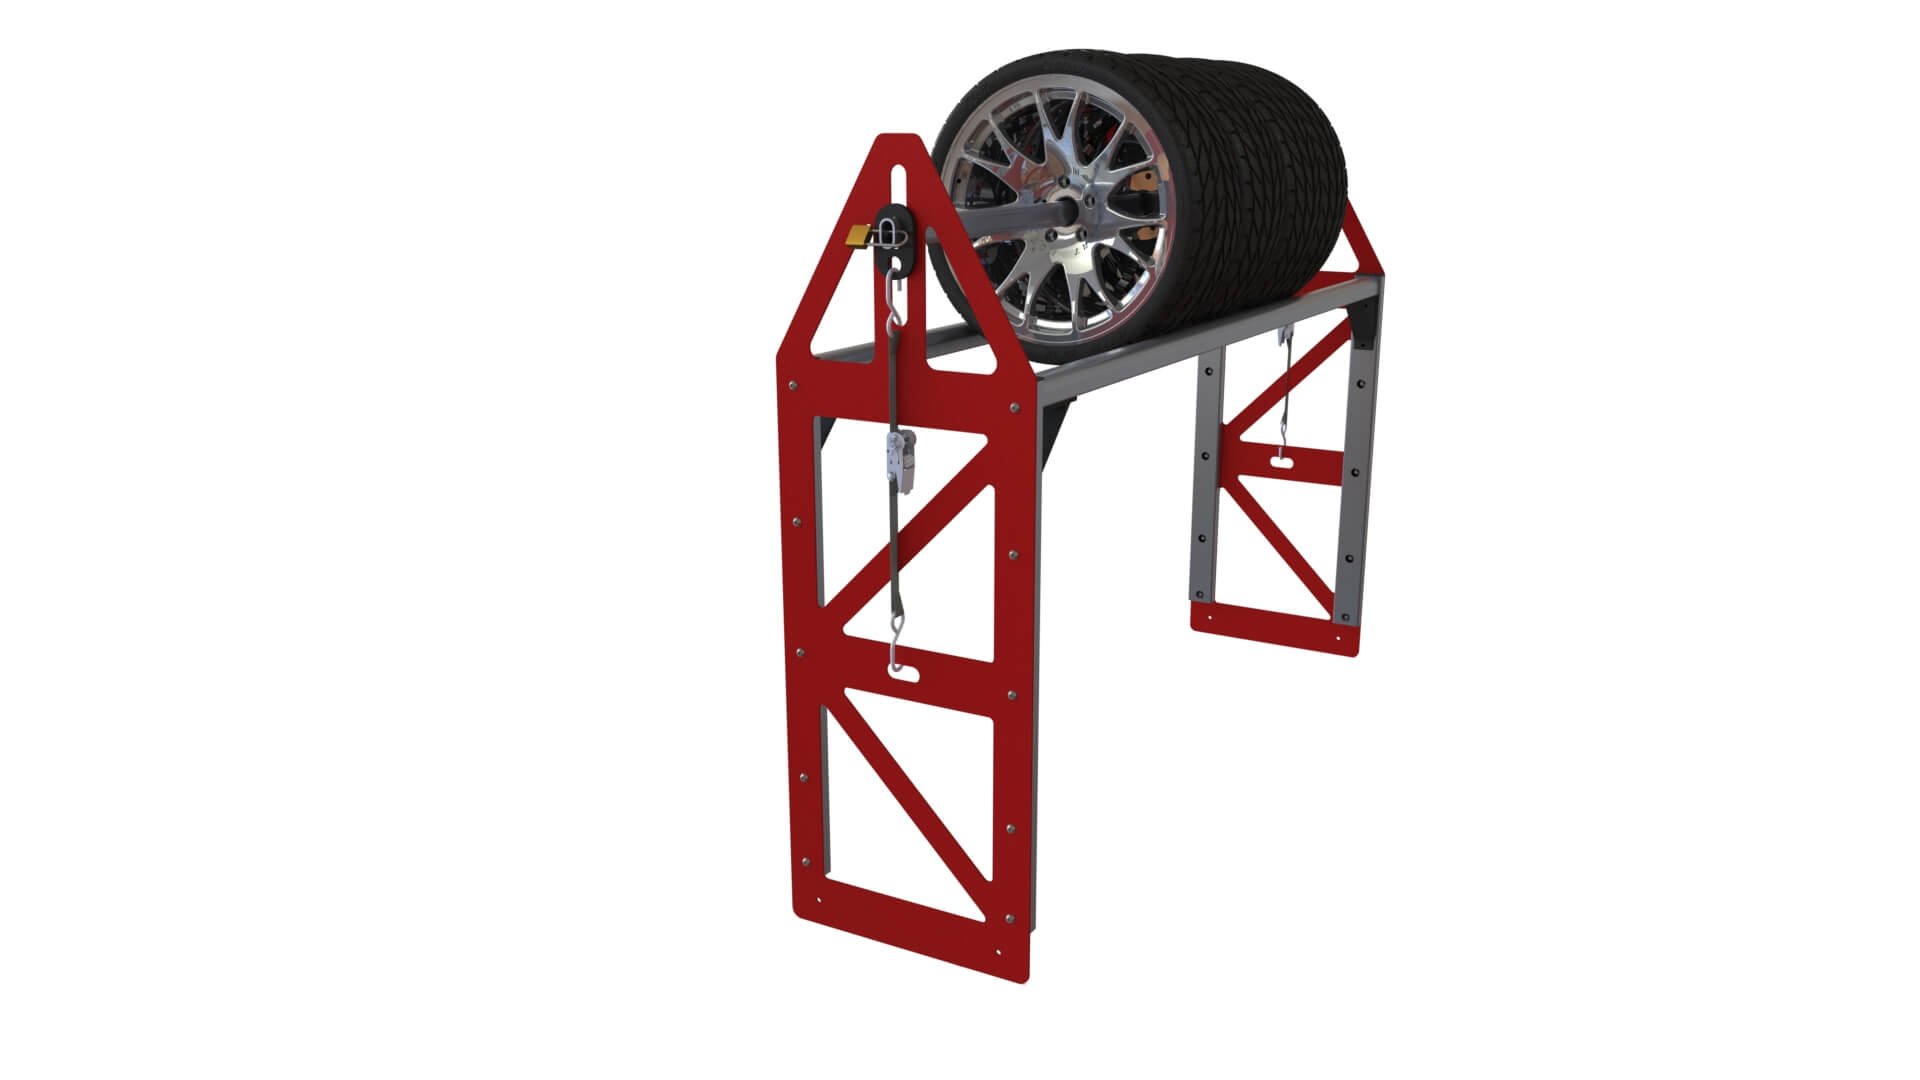 Copy of 4 Futura Tire Rack Extended with tires